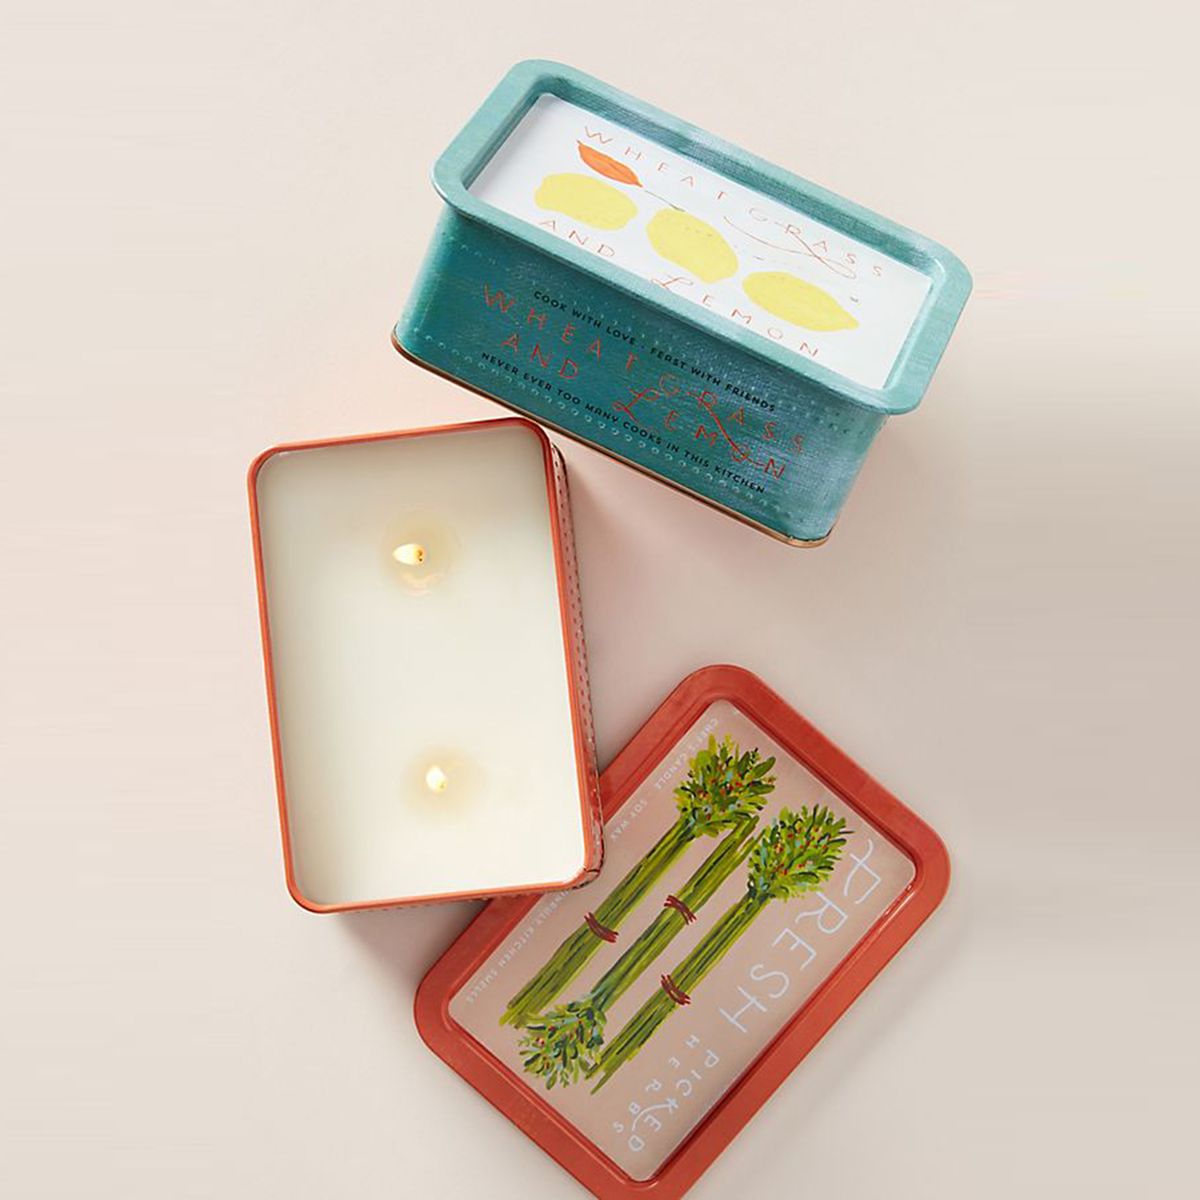 Anthropologie Tin Chef's Candle